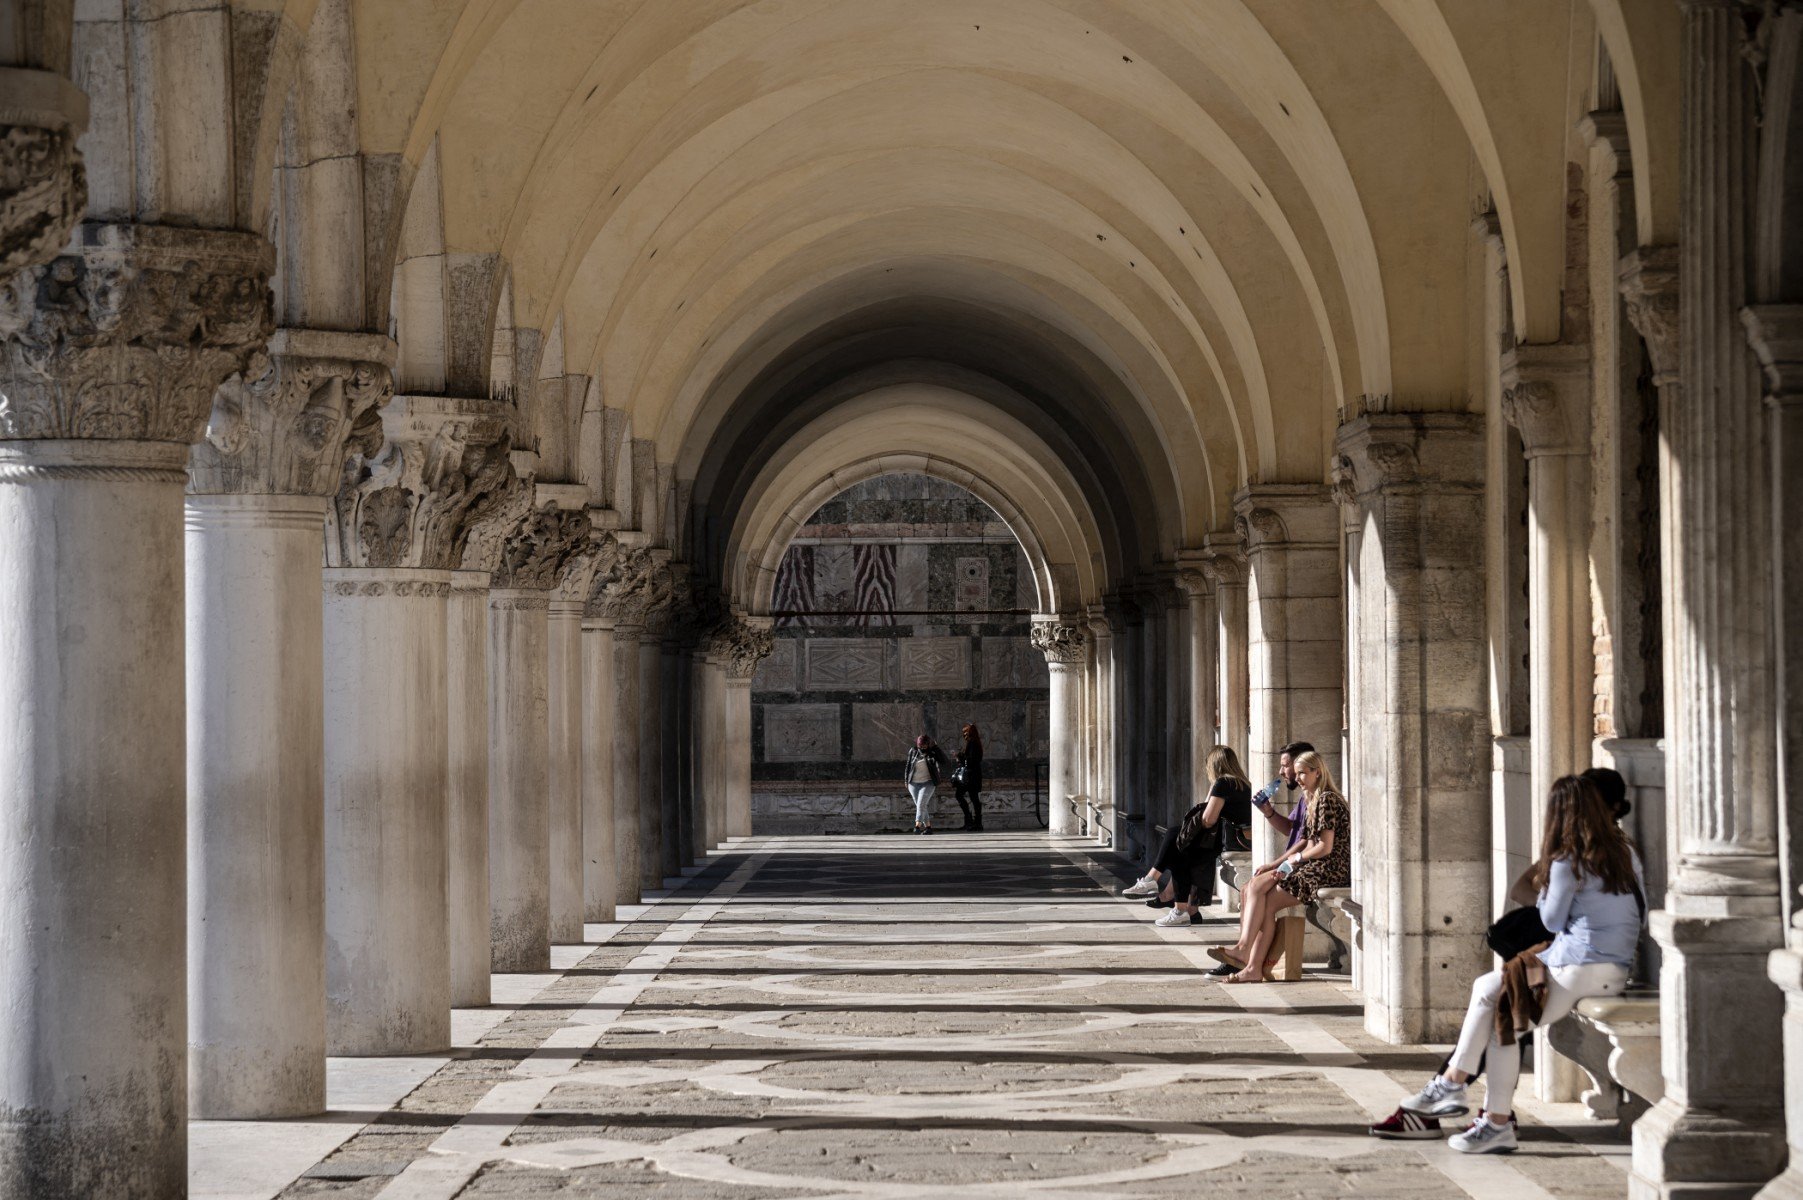 Tourists sit under the archway of the Doge's Palace in Venice